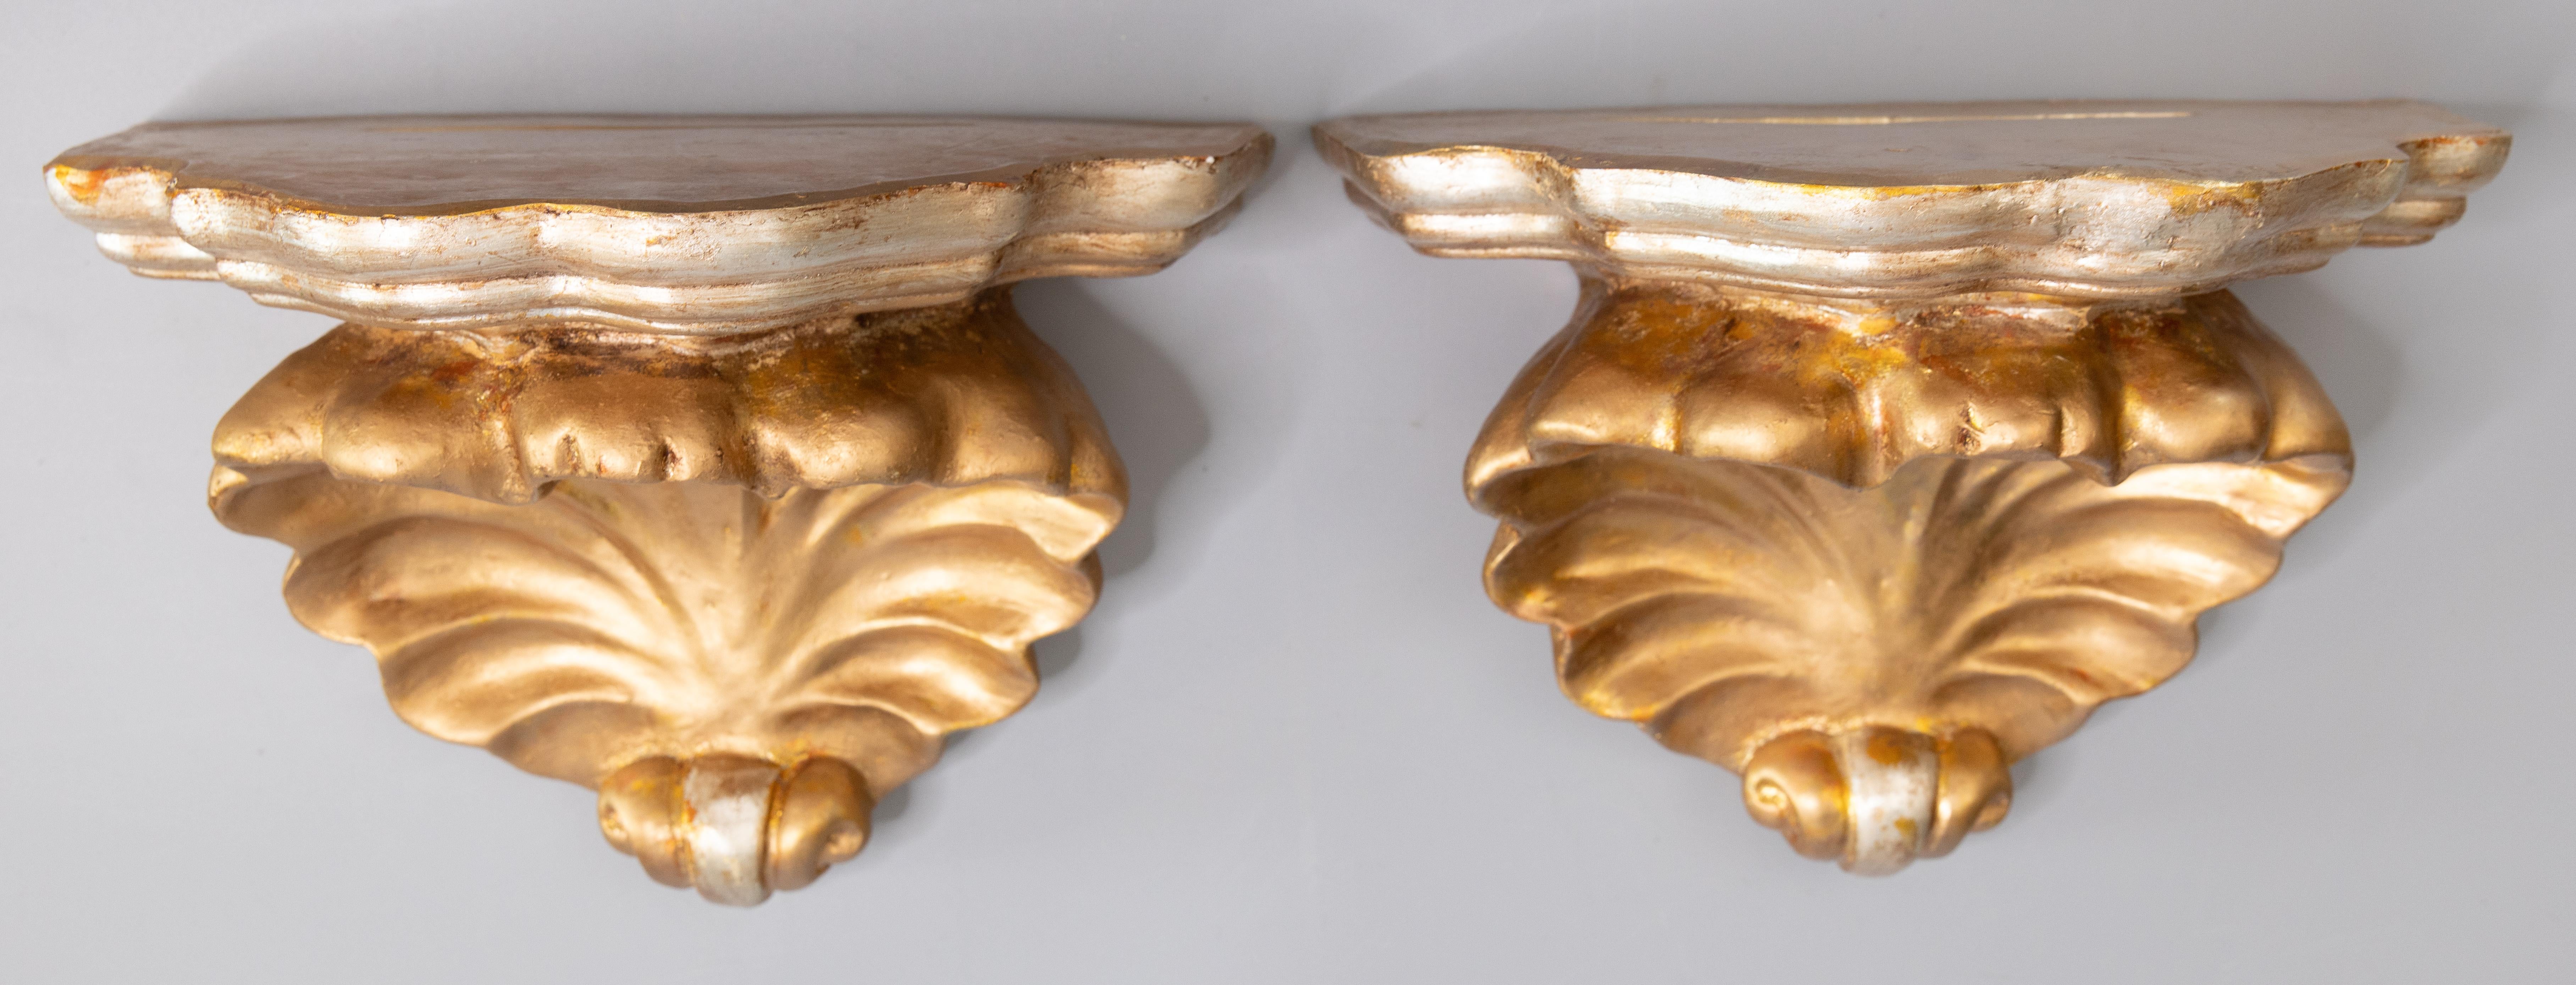 A lovely pair of vintage Mid-Century Italian gilded plaster wall brackets or shelves with a seashell design and silver accents. They are perfect for displaying decorative collectibles or fabulous on their own.

DIMENSIONS
10.75ʺW × 6.25ʺD × 7.5ʺH